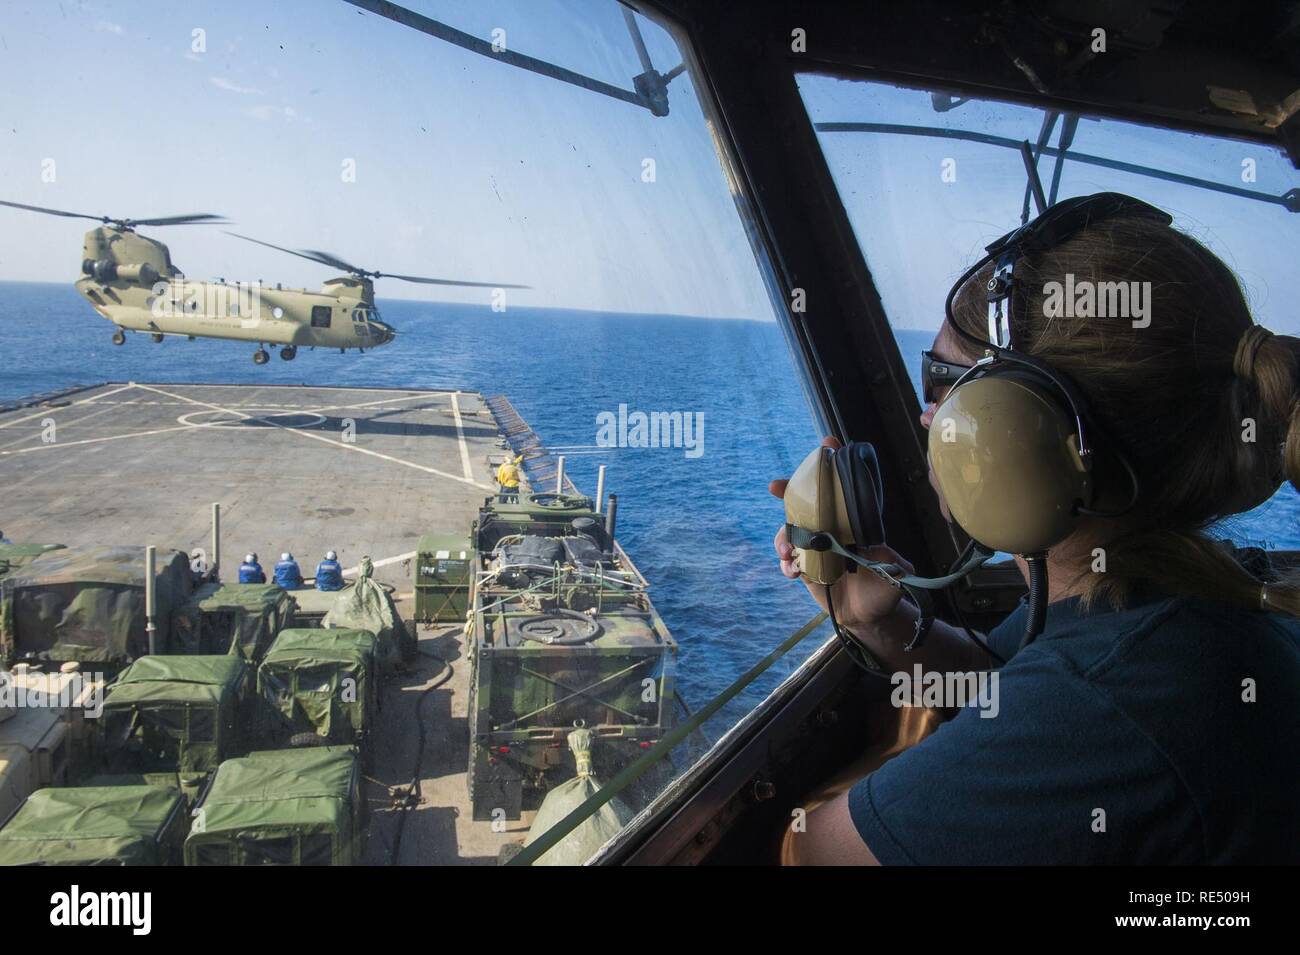 A United States Navy sailor talks to pilots from the tower as they land a CH-47 Chinook from the United States Army 82d Combat Avaition Brigade onto the USS Whidbey Island (LSD 14) in the Gulf of Aden, Nov. 11, 2016. The training allowed troopers from the 82d CAB to get their qualification in landing on naval ships, each crew member had to perform five day-time landings and five night-time landings using NVG capabilities. The 82d CAB rapidly deploys in support of the Global Response Force to conduct decisive aviation operations worldwide. Enabling the ground force commander with air assault, a Stock Photo